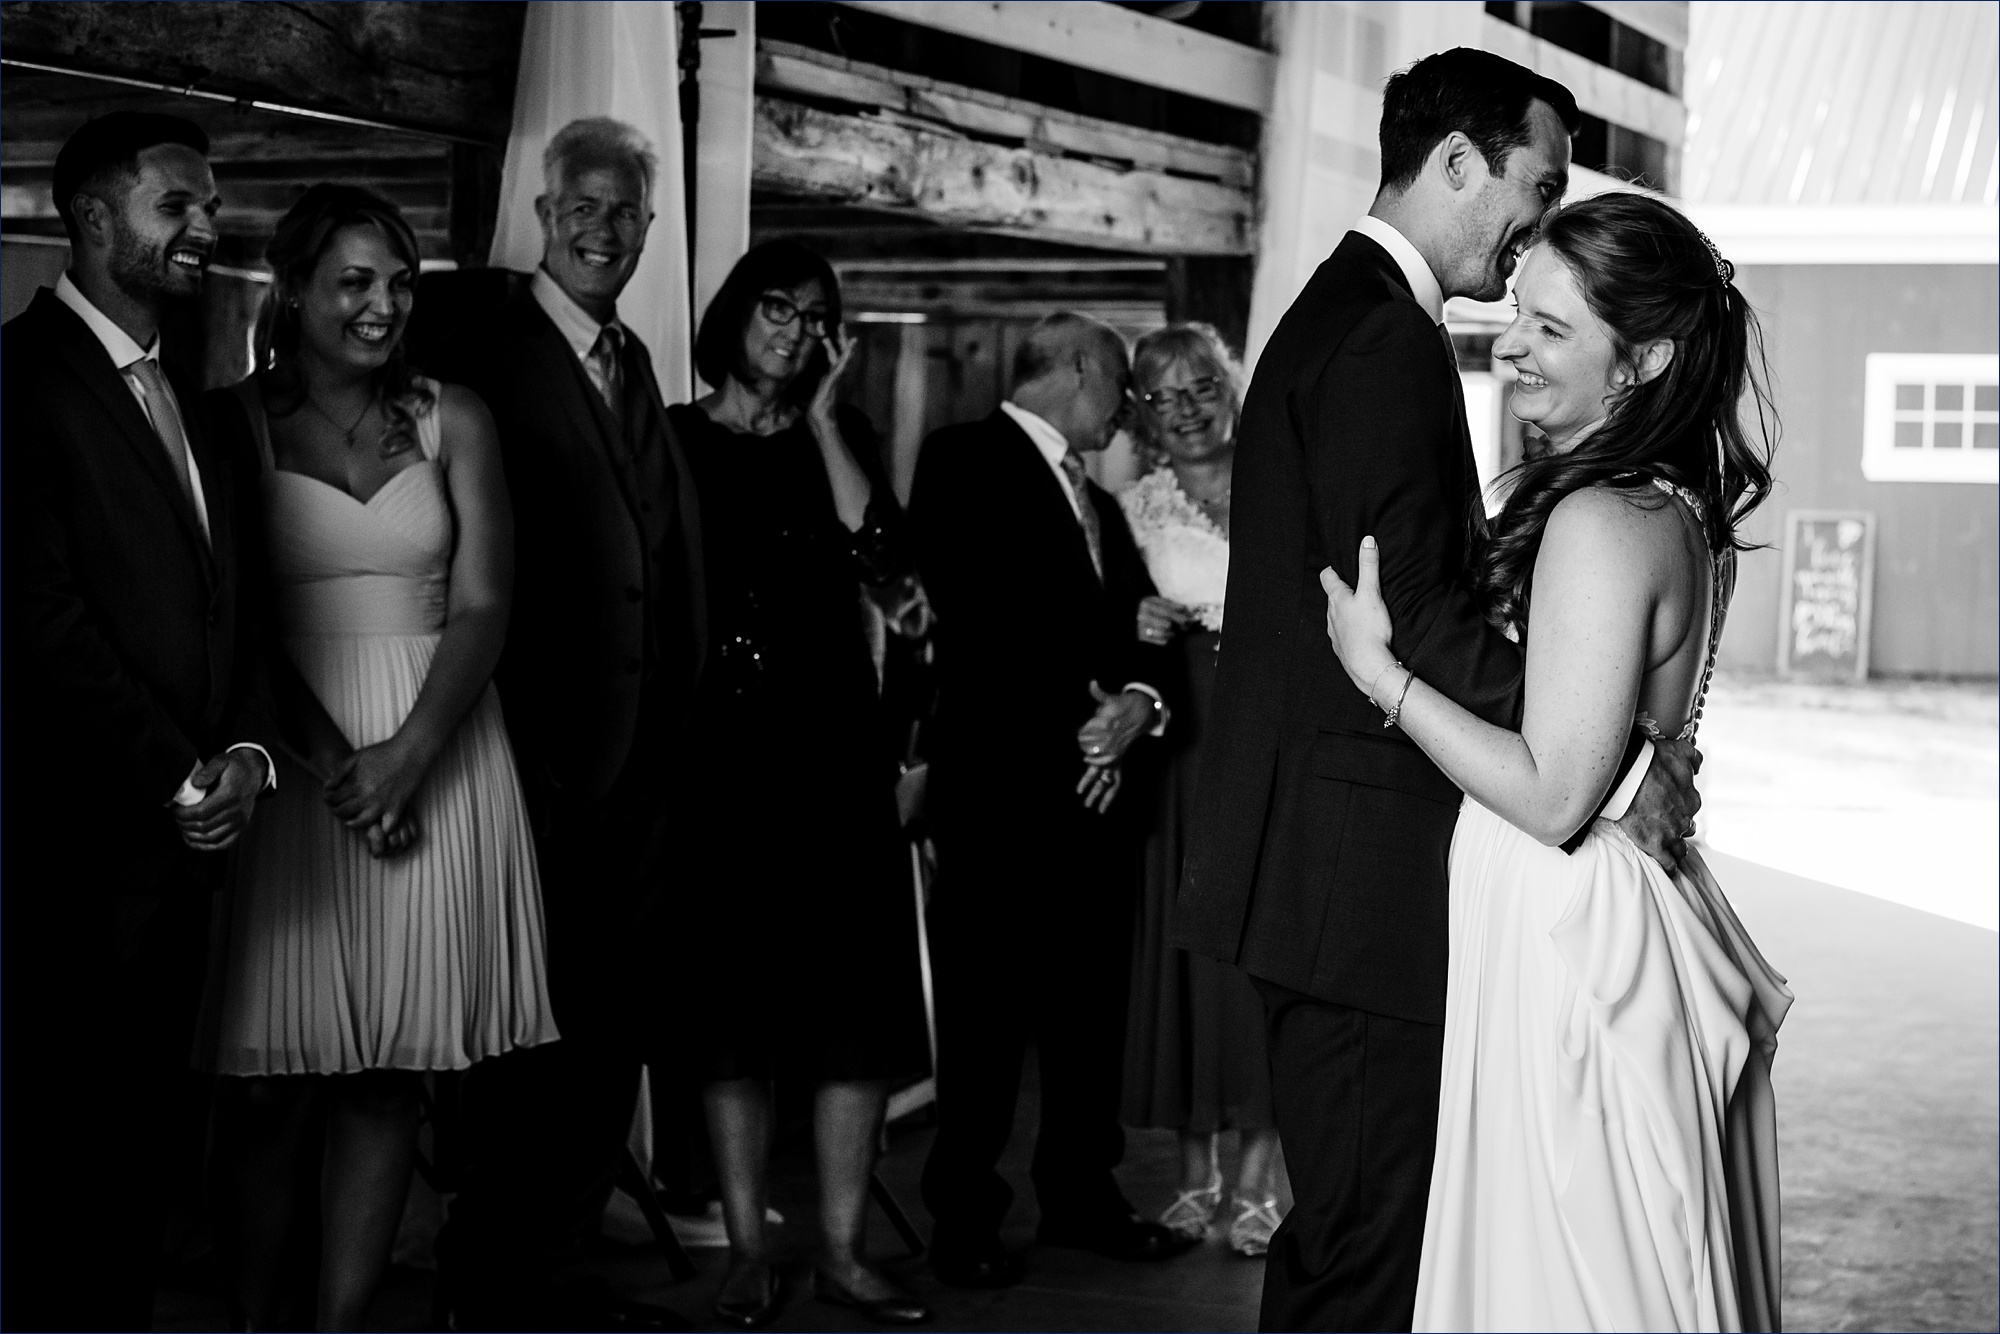 The bride and groom dance together at the reception in the barn at Kitz Farm as family smiles